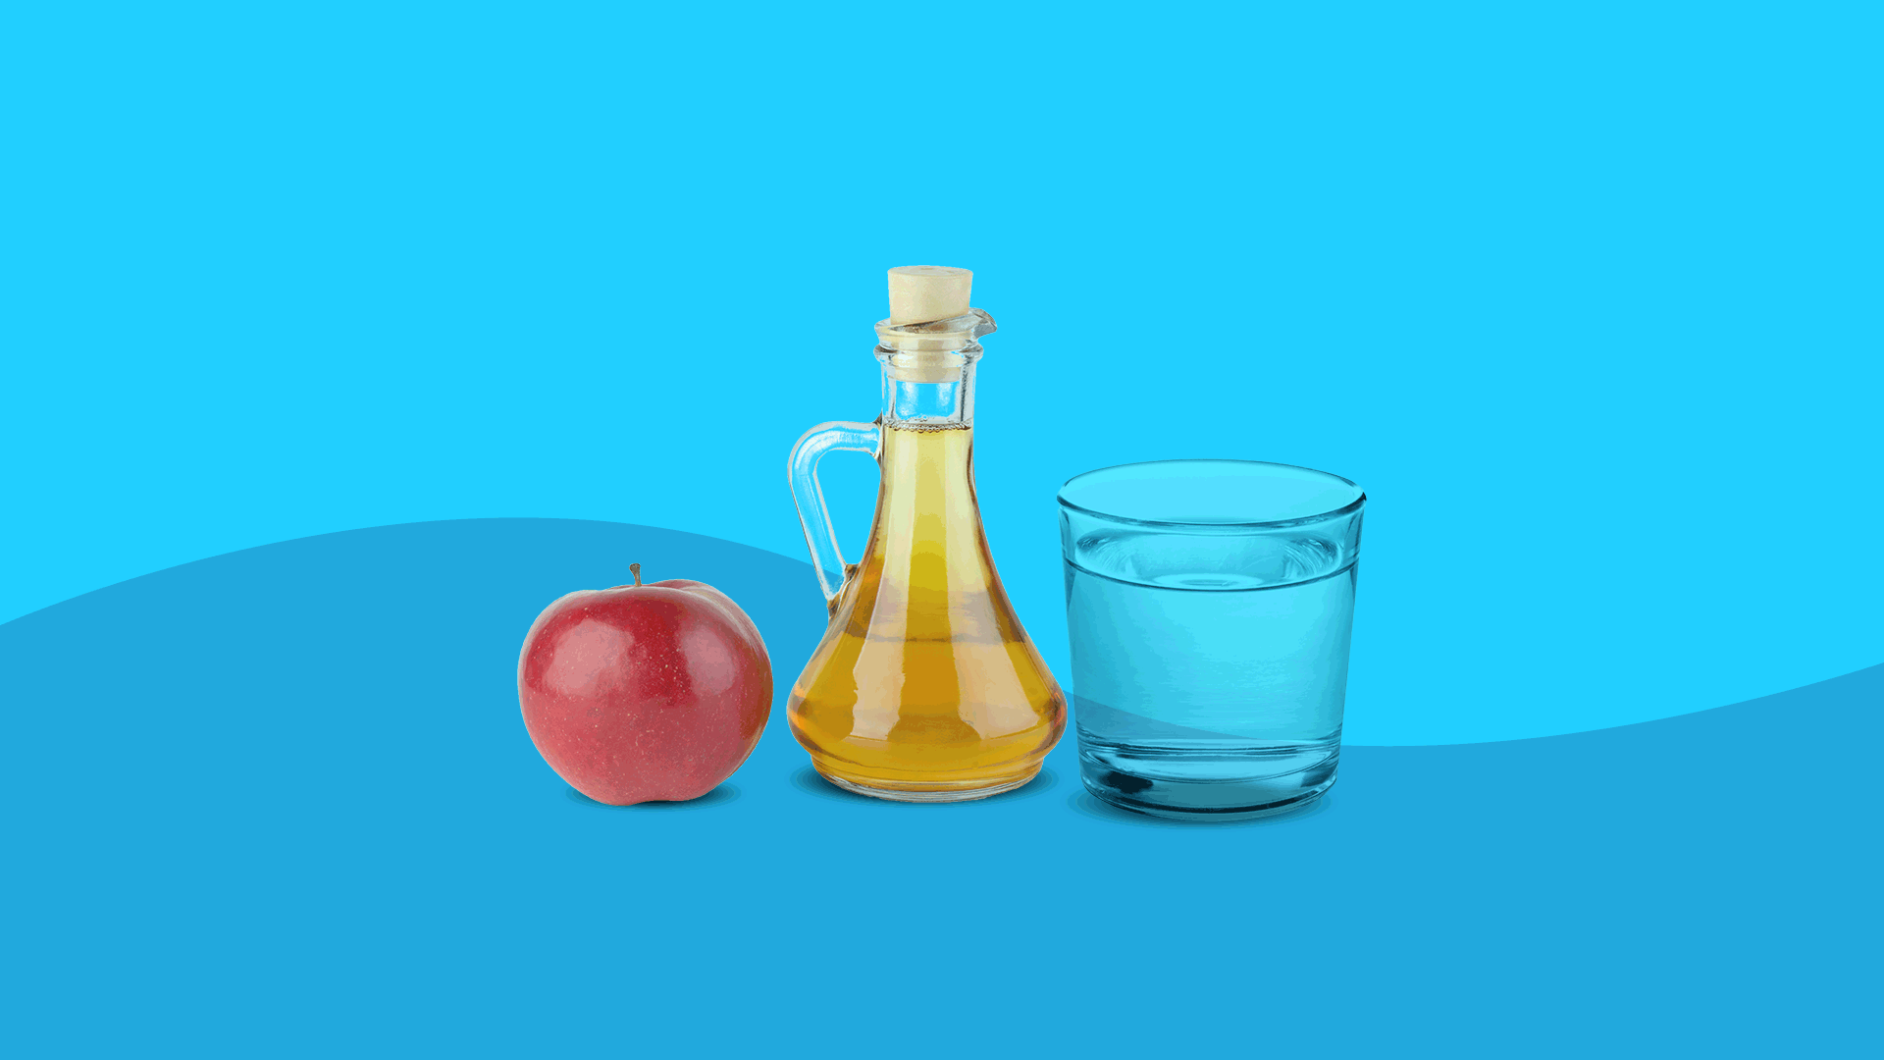 Apple cider vinegar and a glass of water: Natural ways to soothe a sore throat